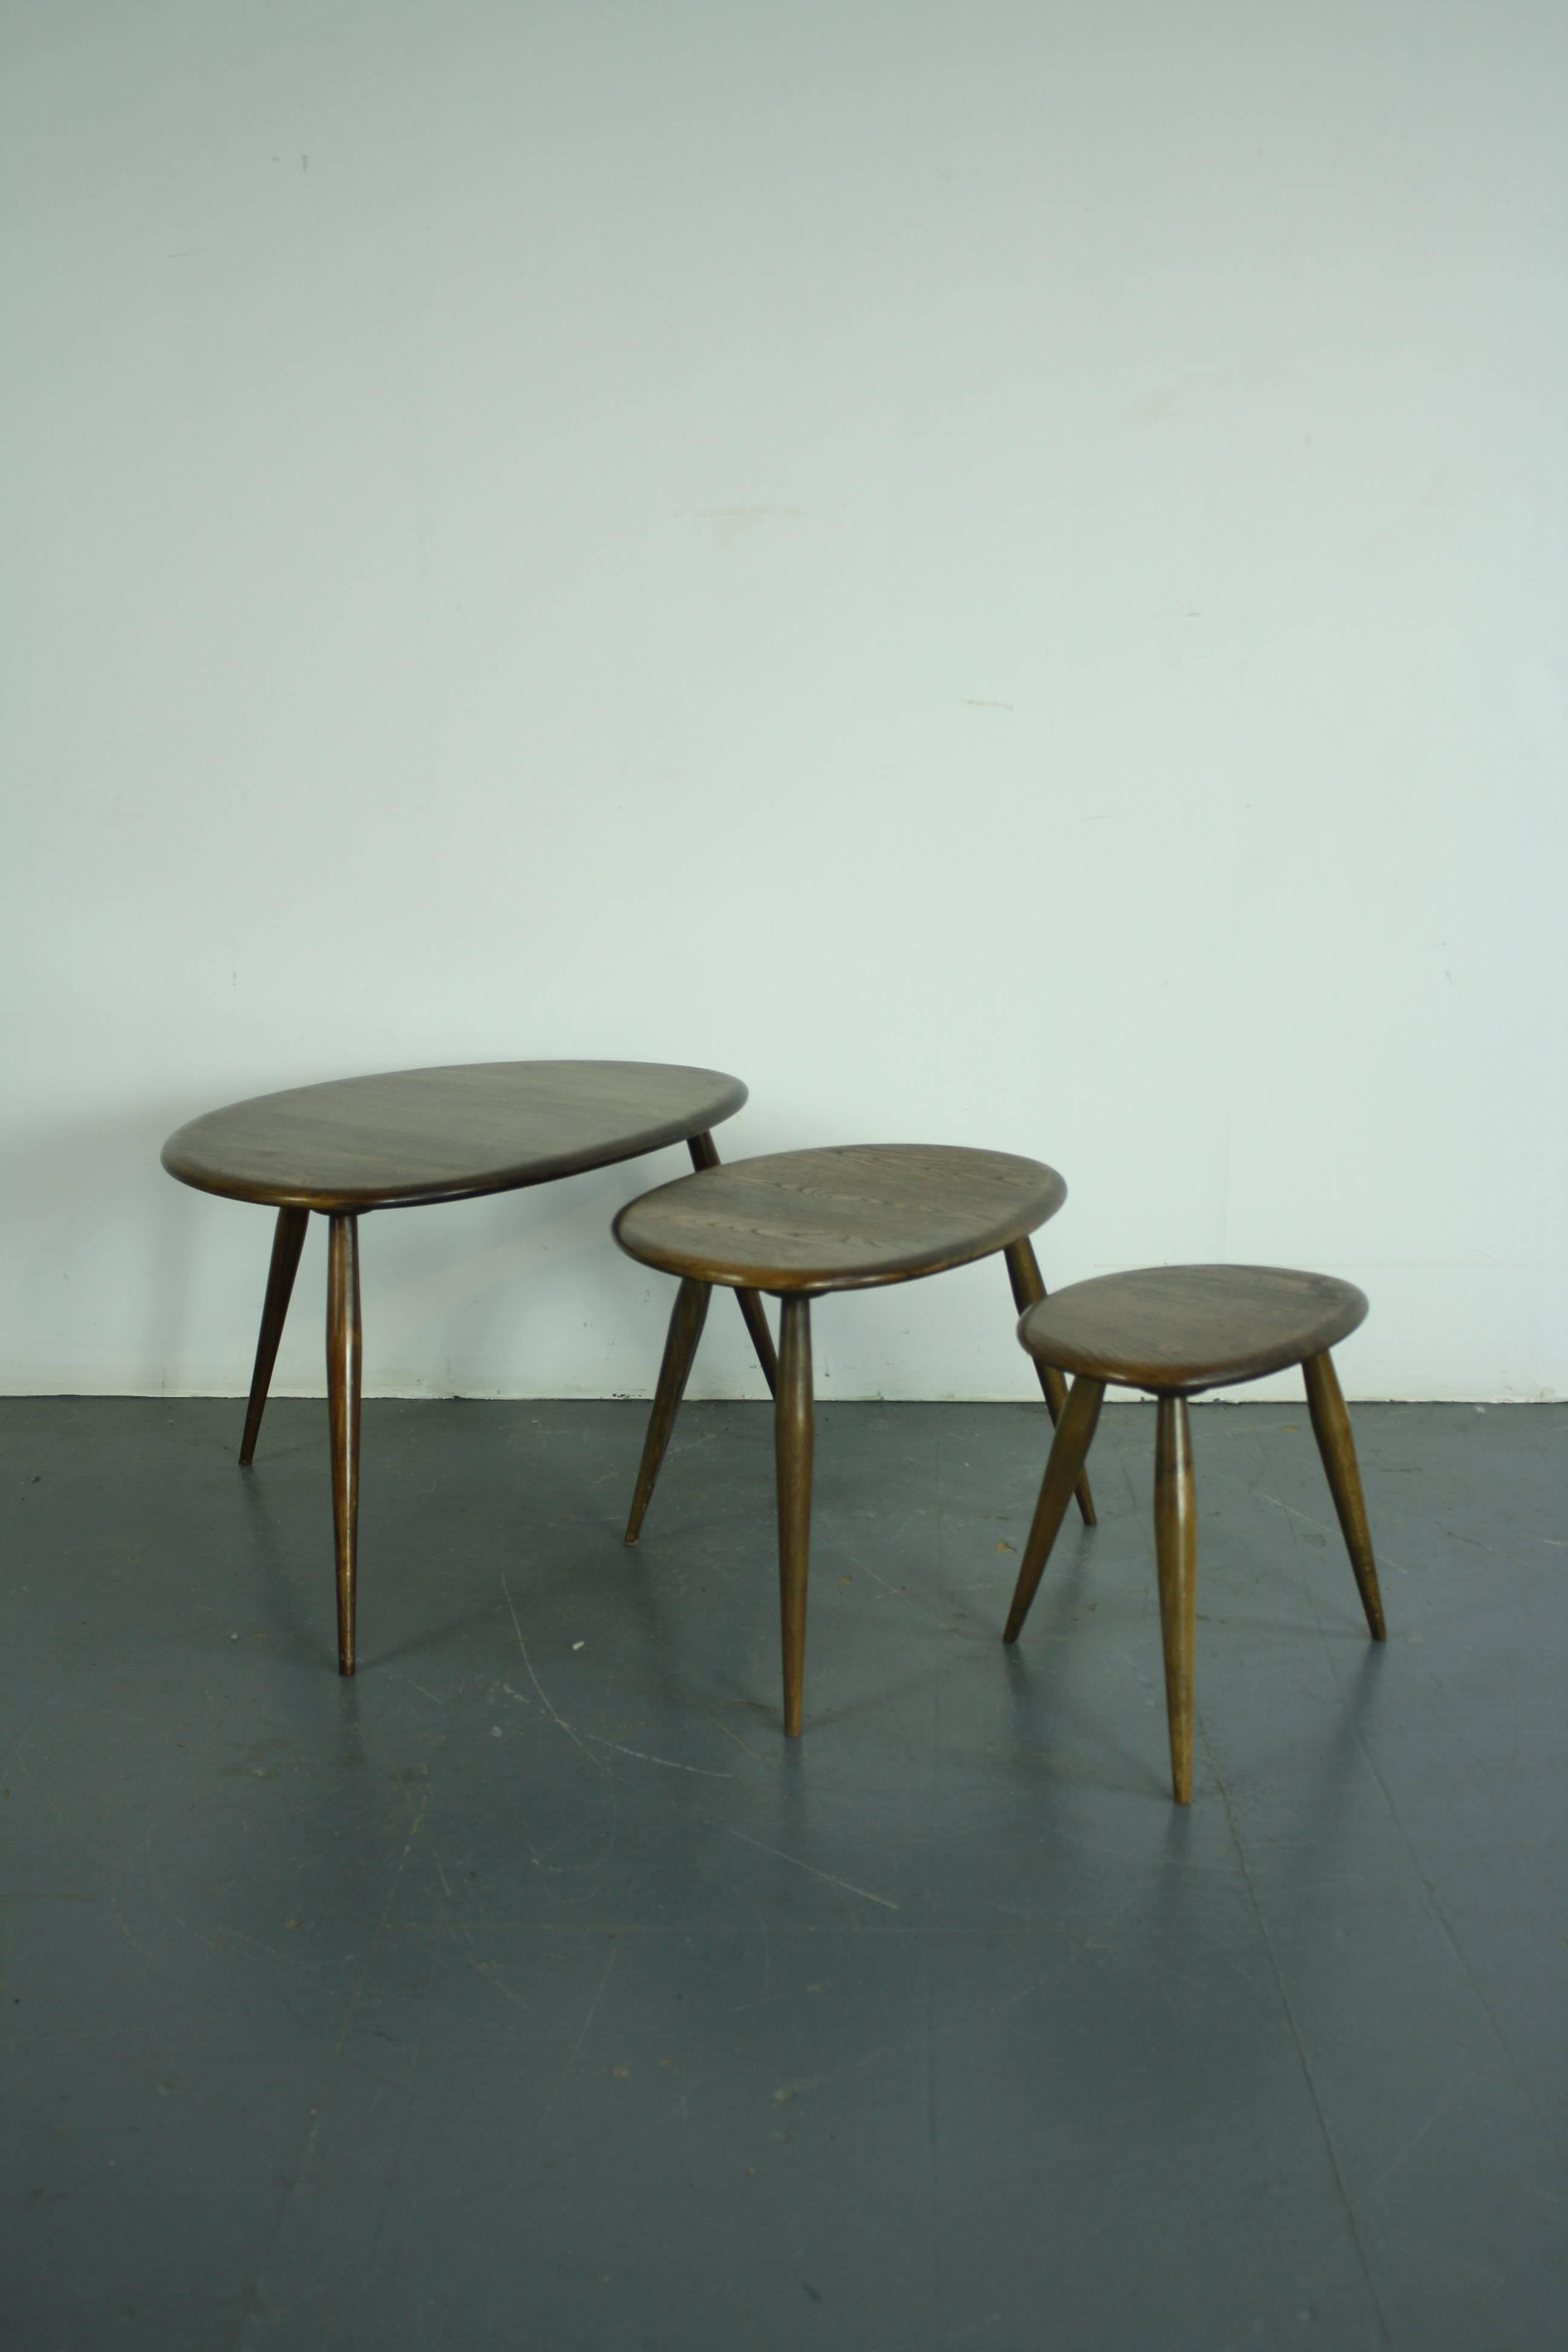 Designed by Lucian Ercolani 1956, these Ercol tables have a wonderful simplicity of design and appealing curves. Made with a beech top and splayed tapering legs. Lovely patina to the wood.

In good vintage condition, with some wear commensurate